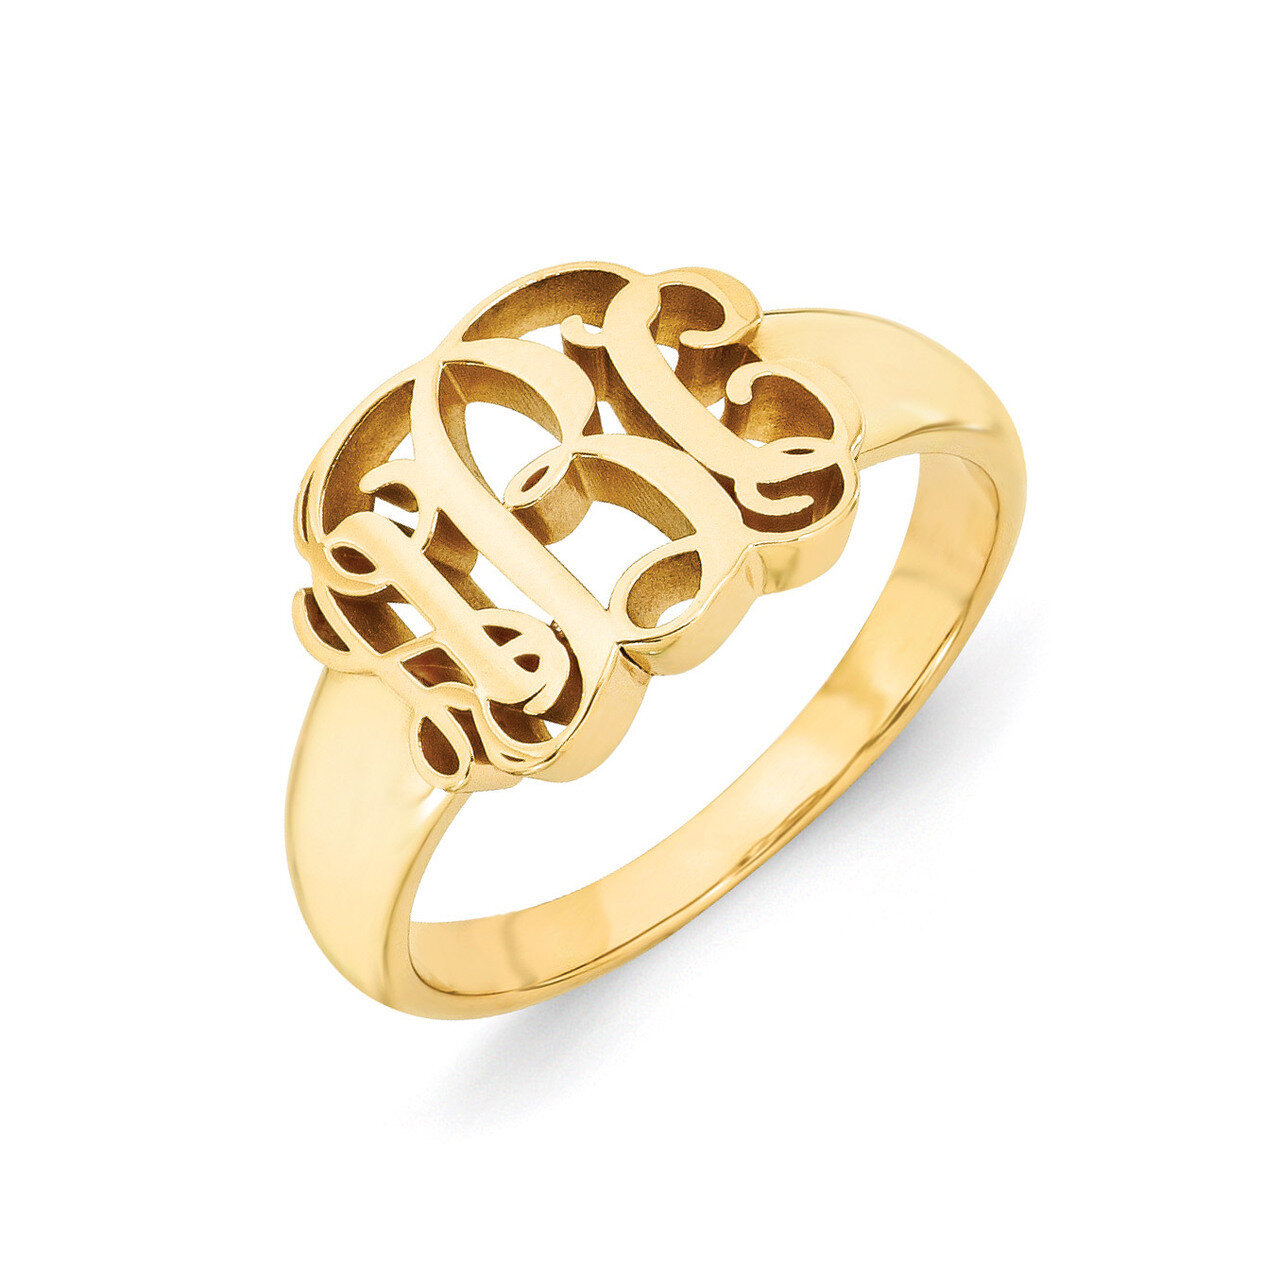 Monogram Signet Ring Gold-plated Sterling Silver XNR51GP